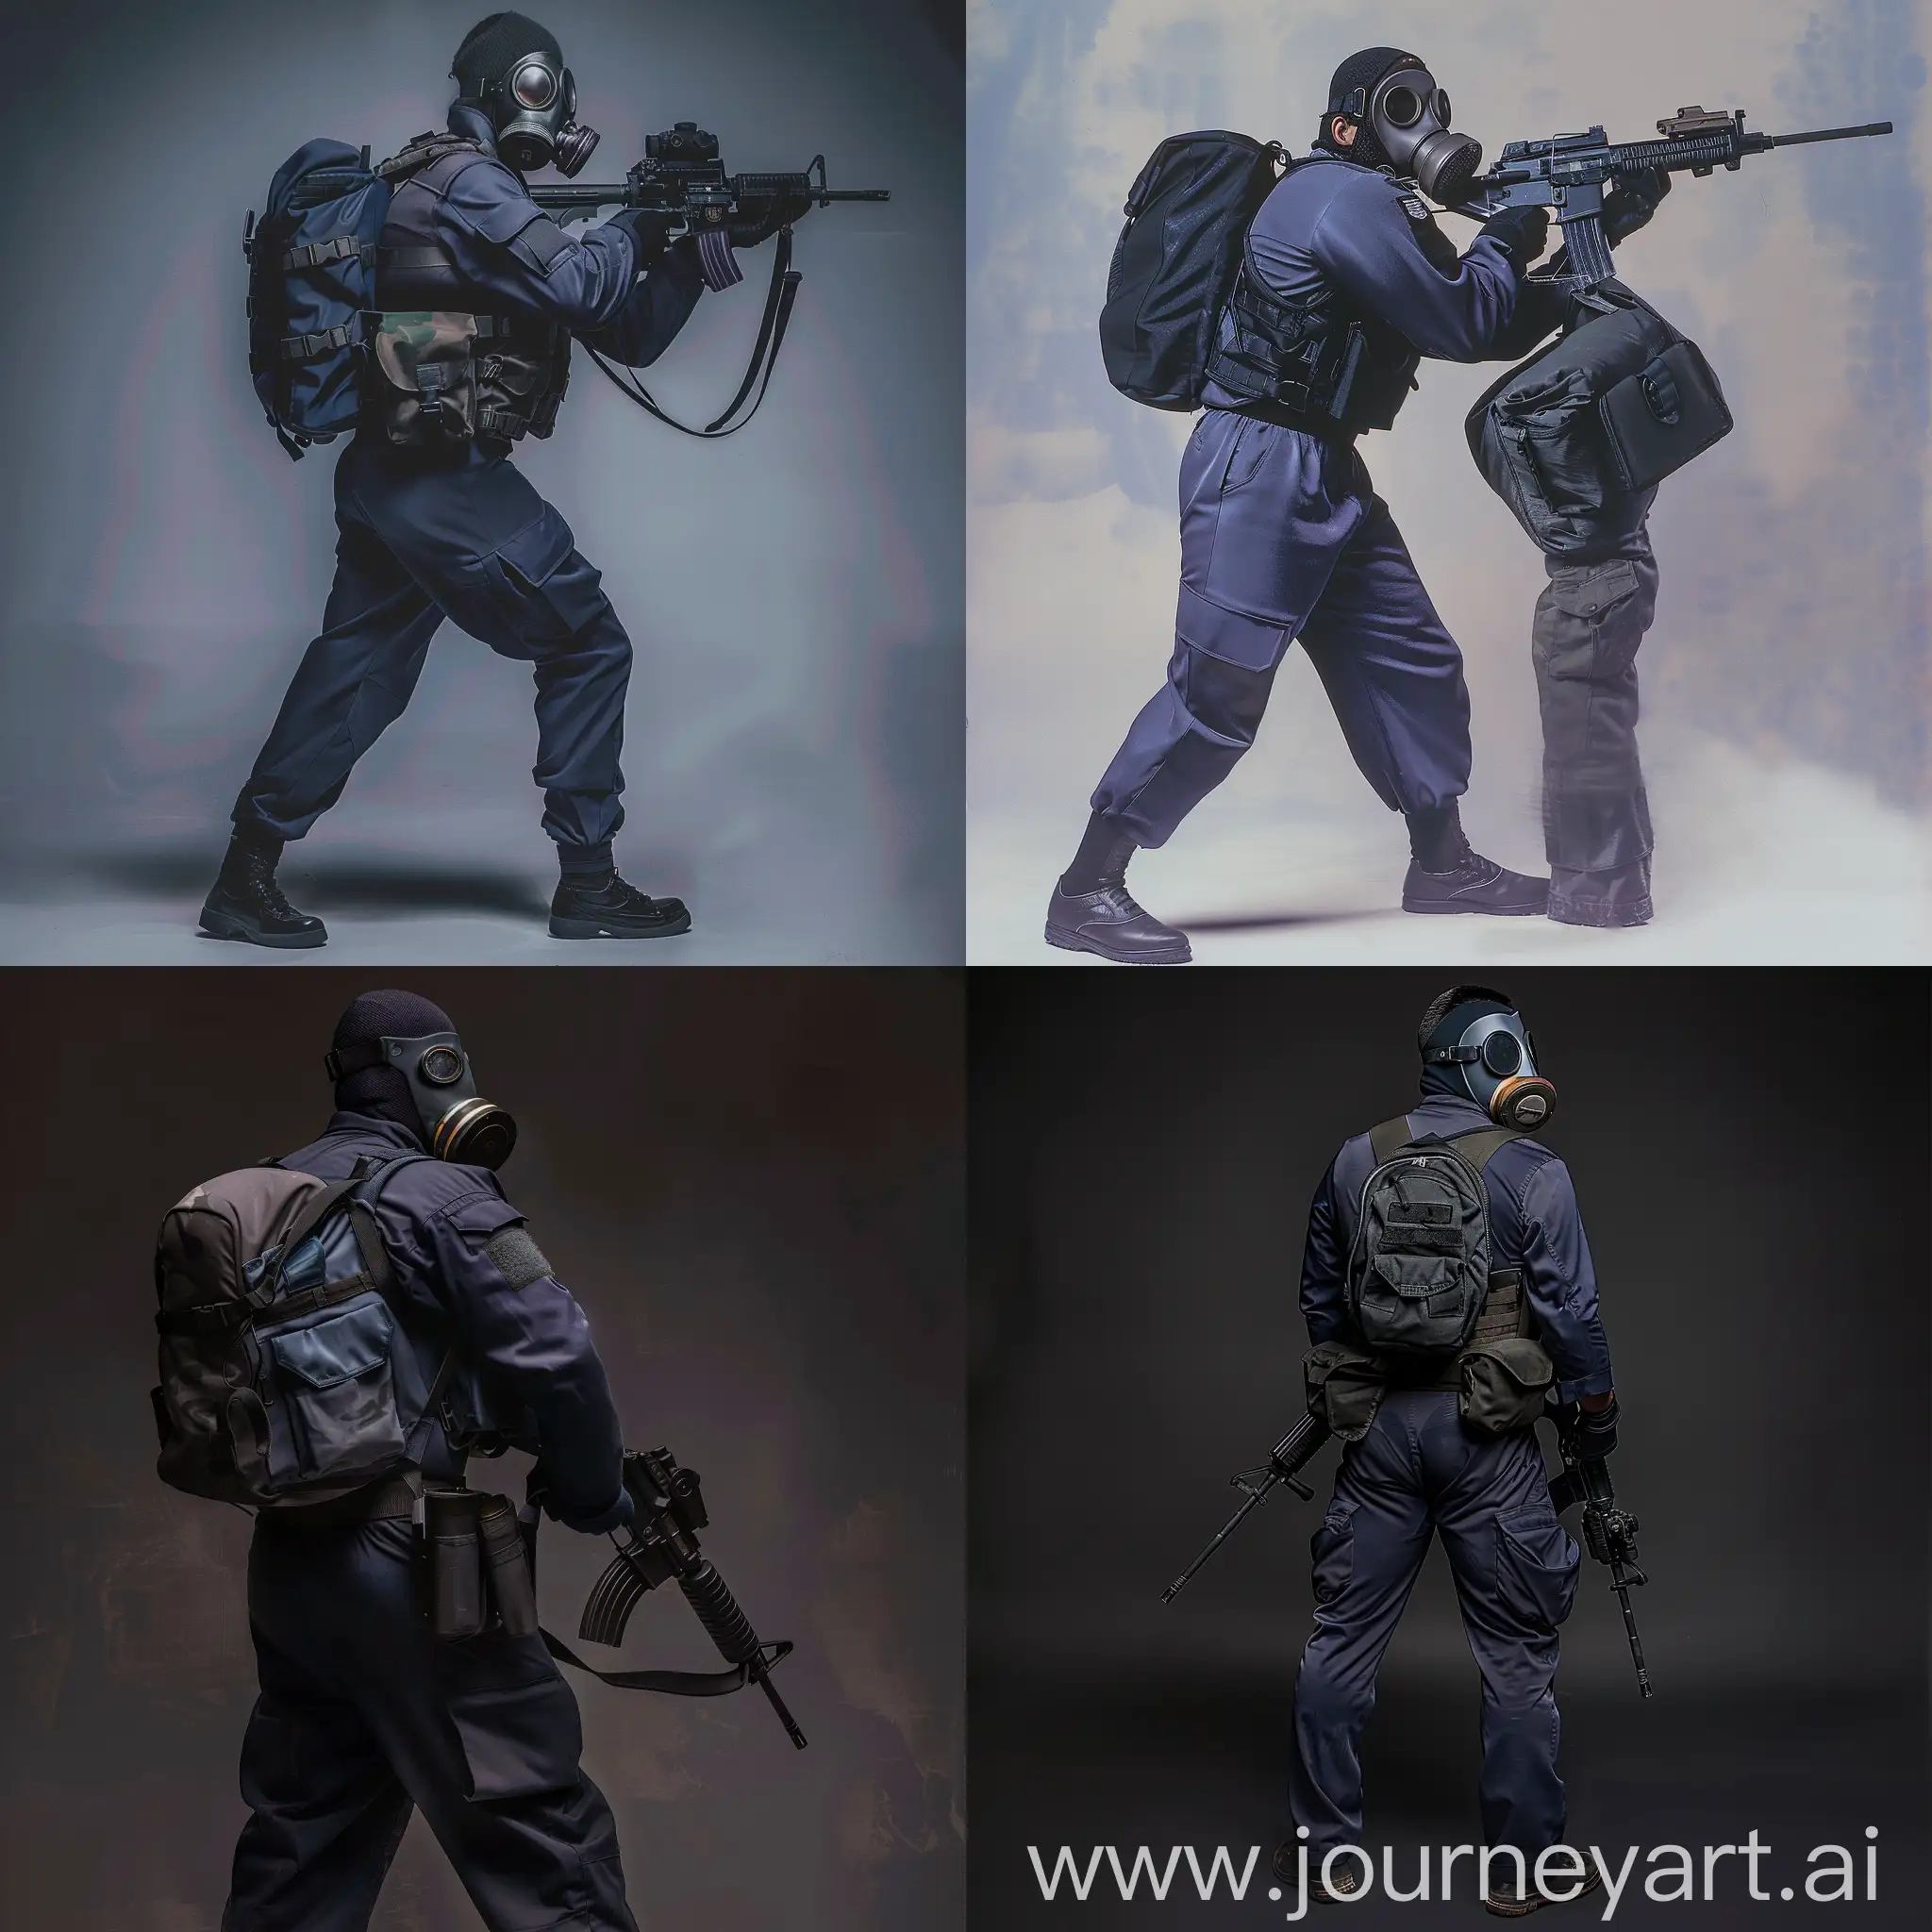 SAS operator 1978 year, dark purple military jumpsuit, gasmask on his face, small military backpack, military unloading on his body, sniper rifle in his hands.